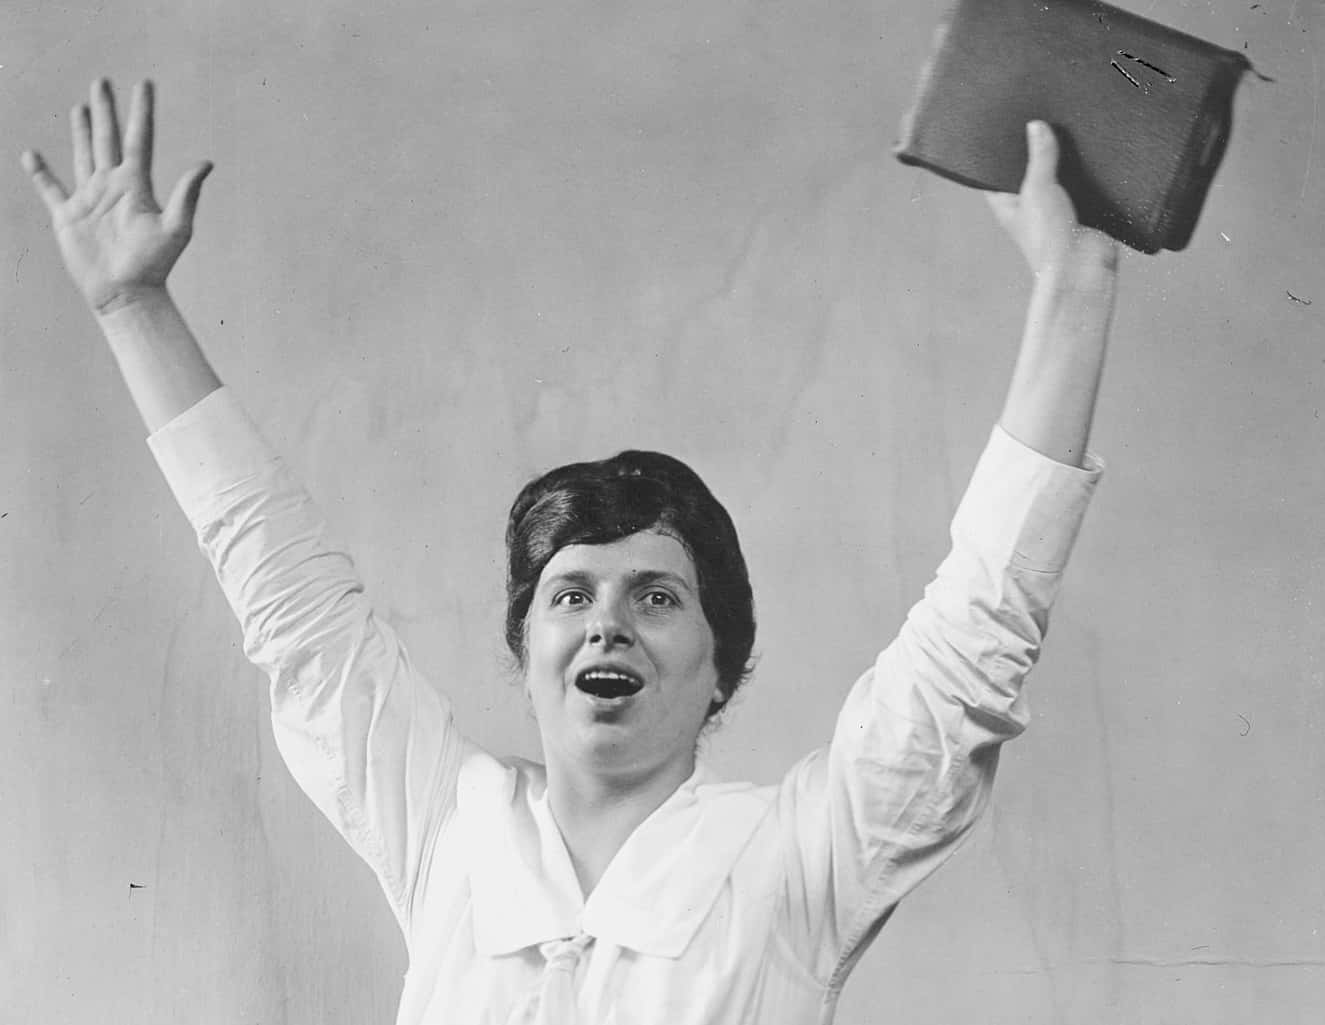 Aimee Semple McPherson Facts